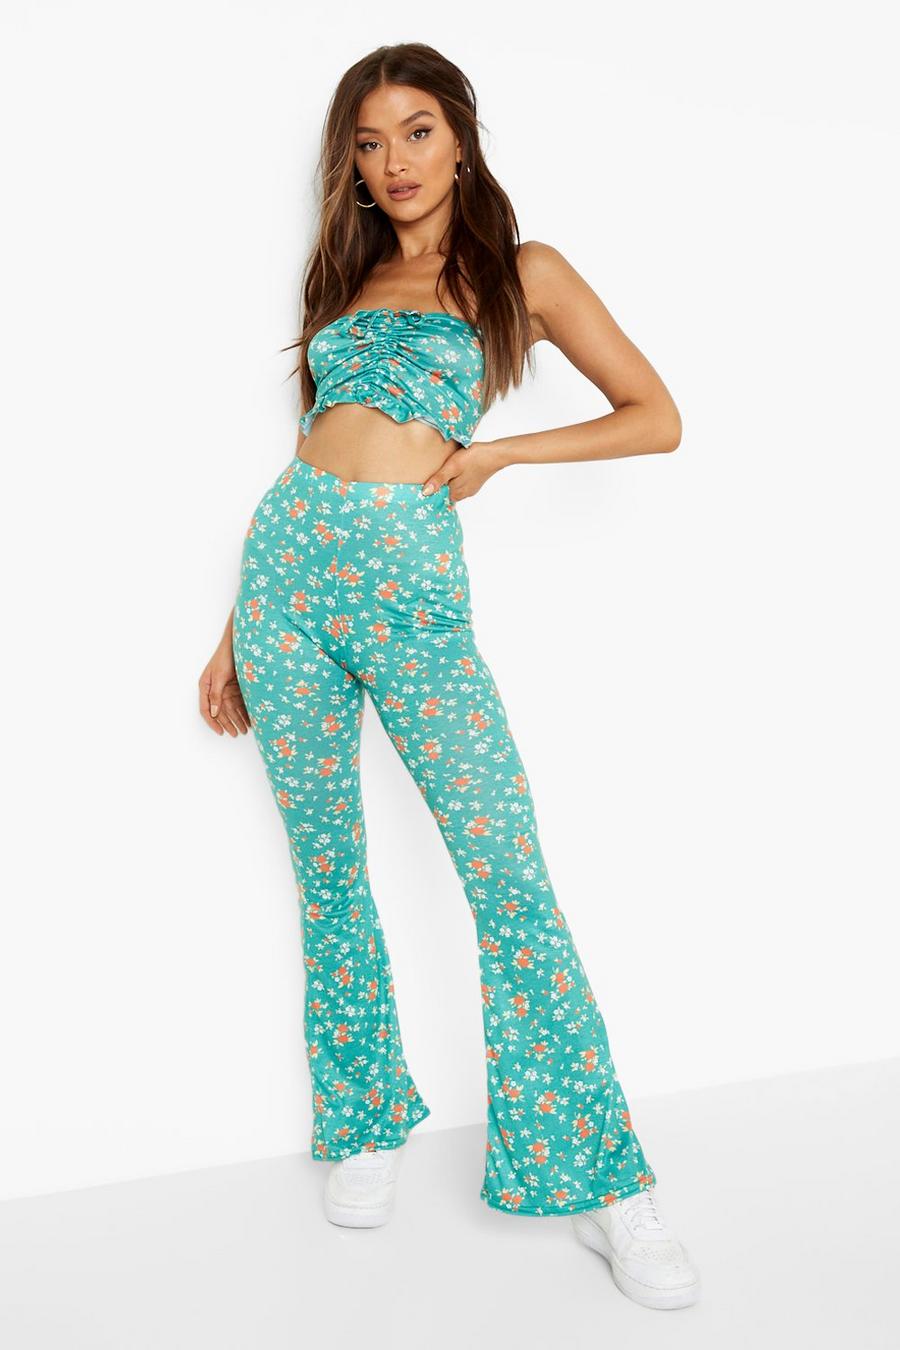 Bright green Floral Bralettete & Flared Pants